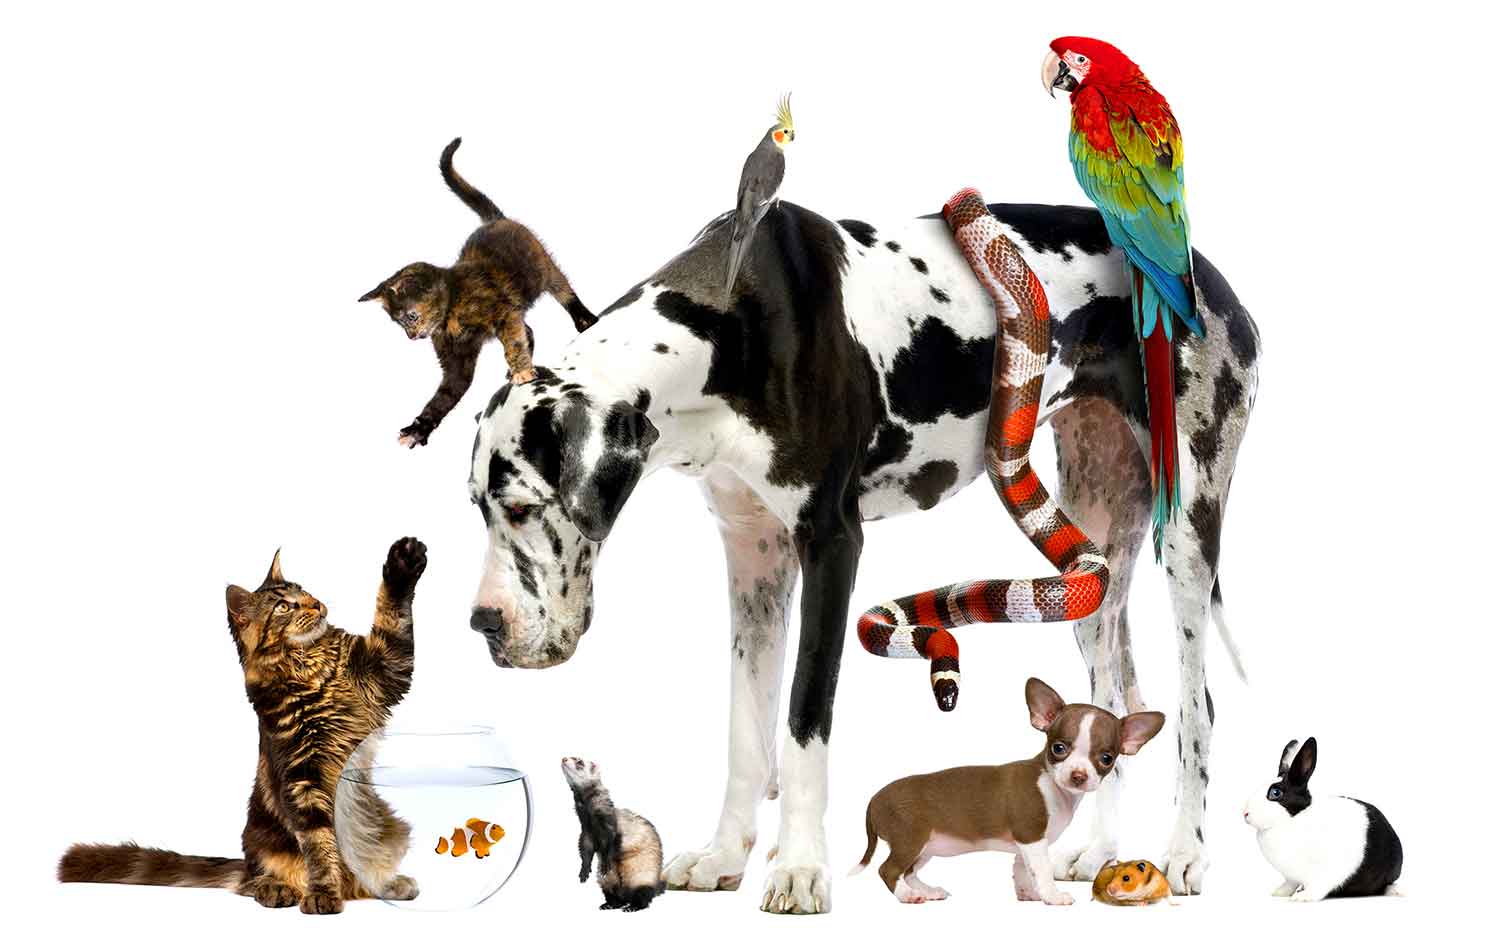 Dogs, cats, fish, a rabbit, a ferret, a bird, a guinea pig, and a snake posed together against a white backdrop.